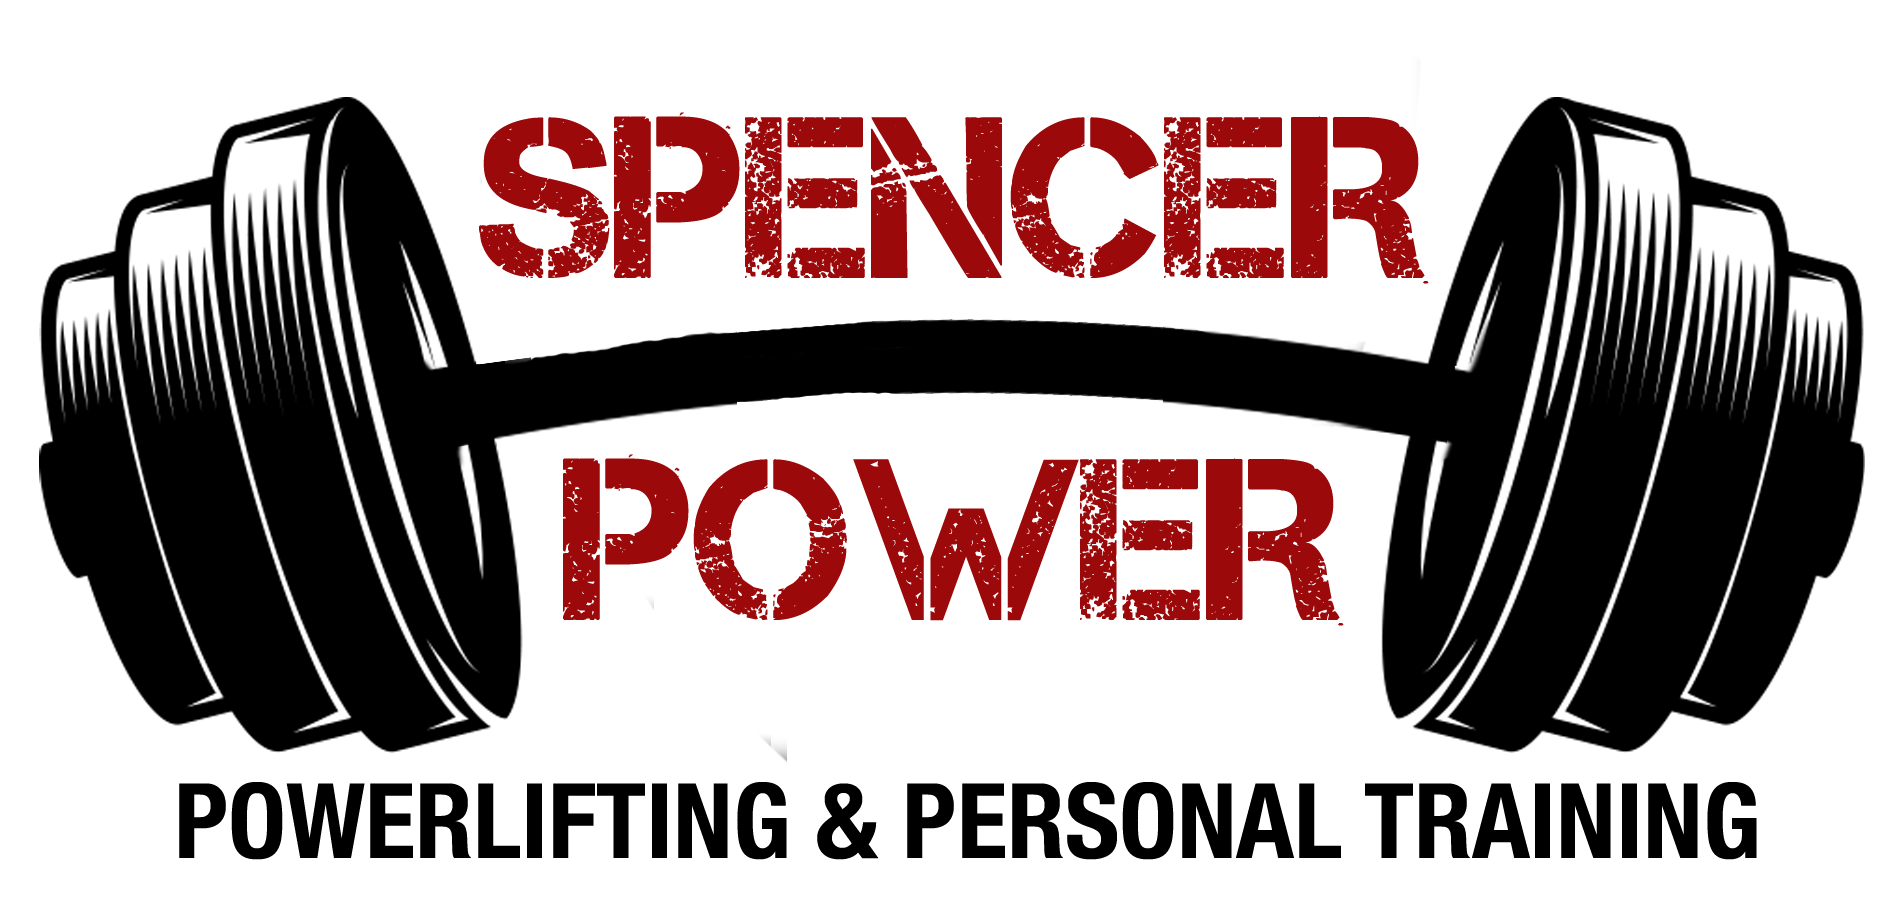 Spencer power and personal. Dumbbells clipart powerlifting